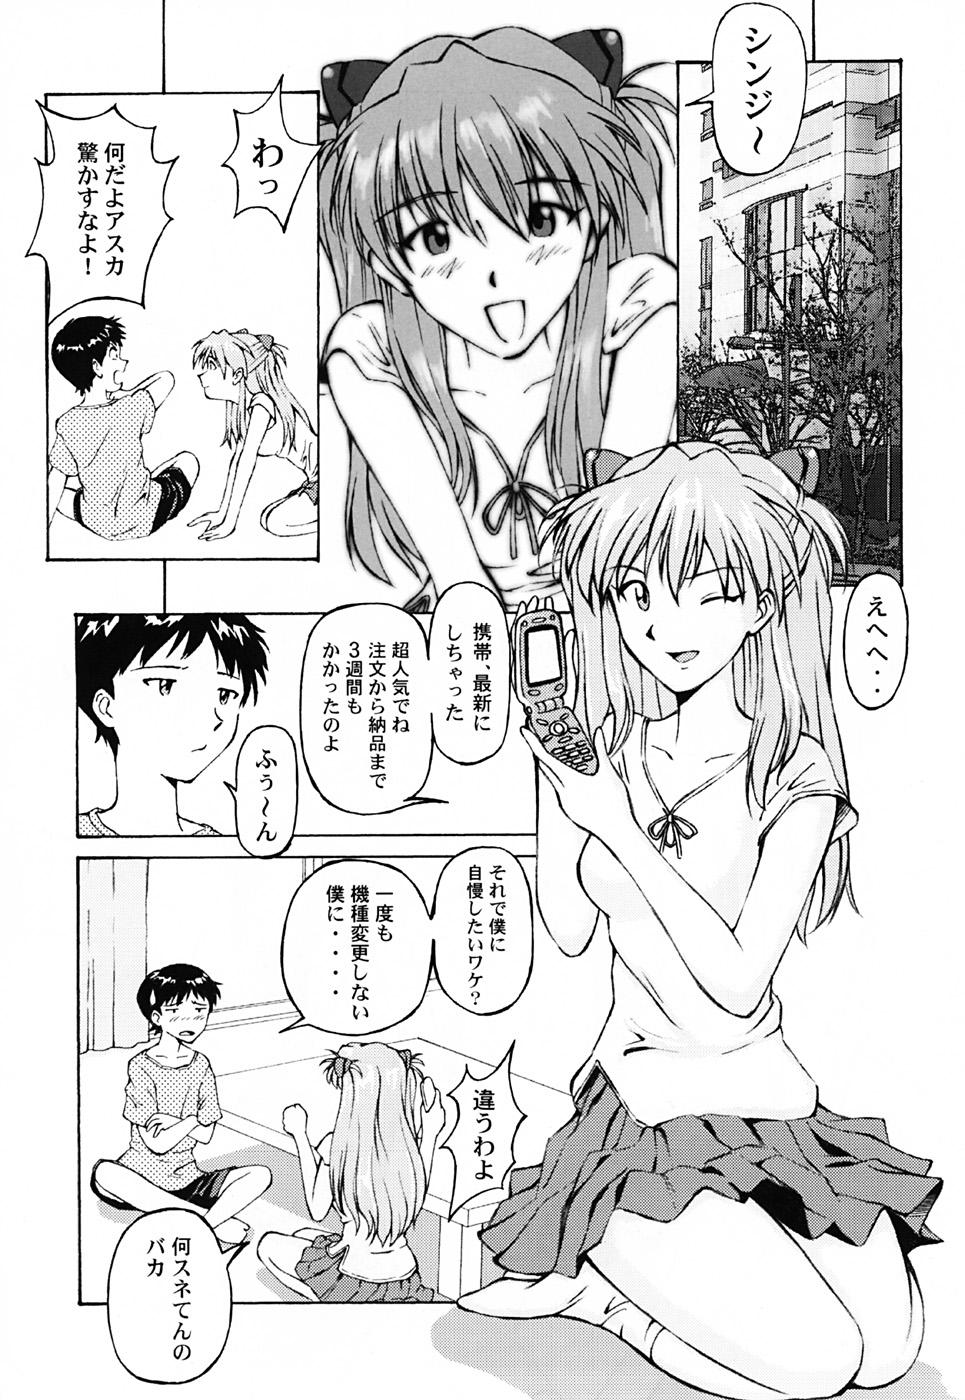 Pounded LOVE CASK - Neon genesis evangelion Beauty - Page 5